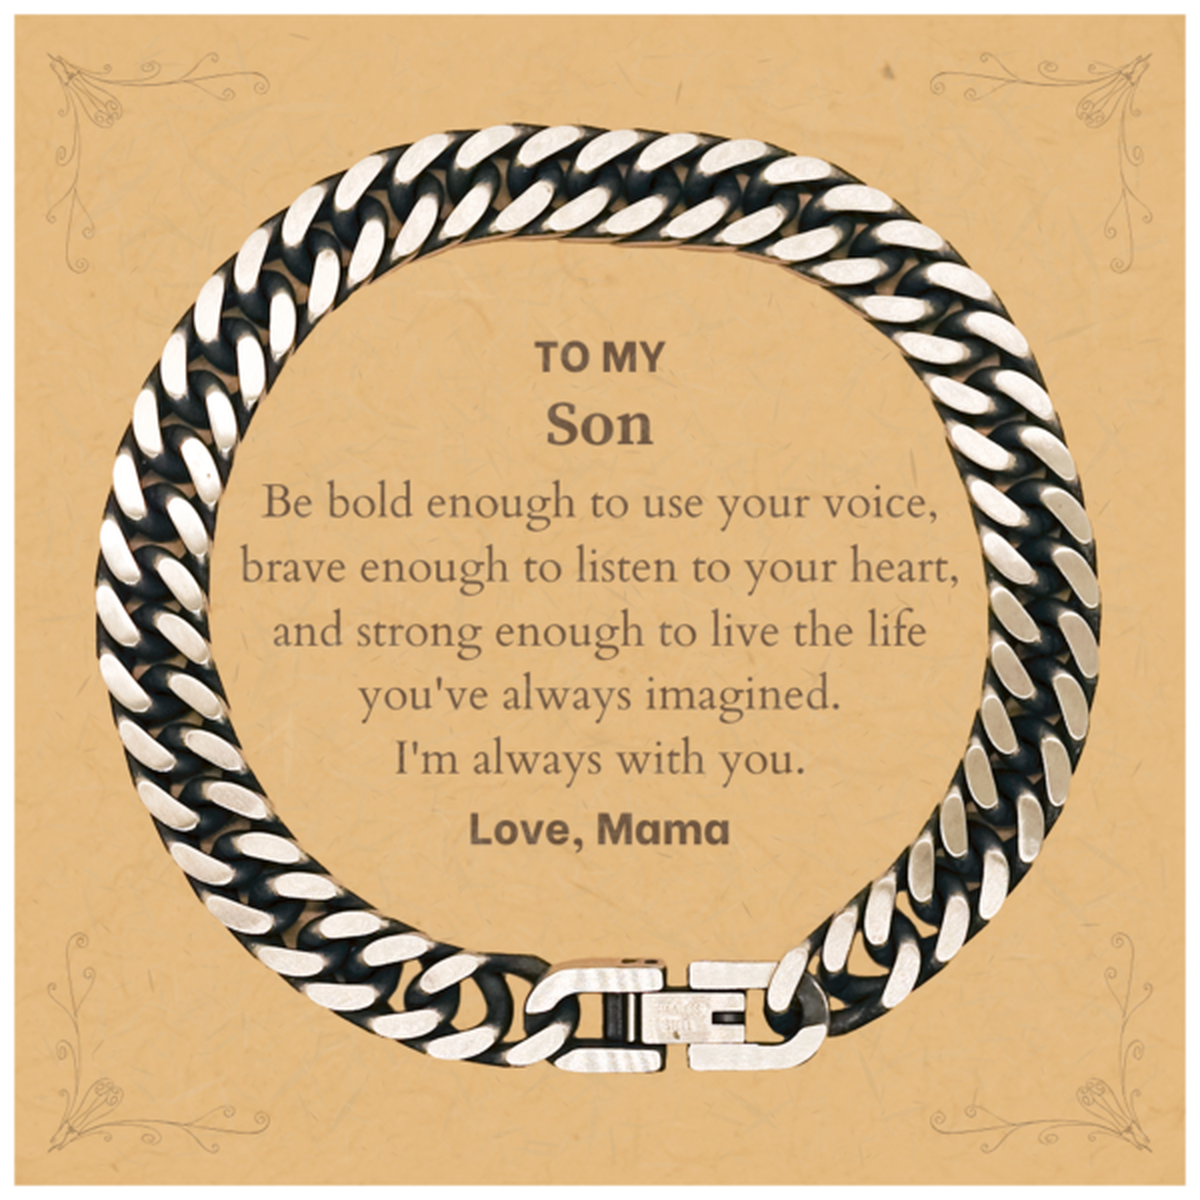 Keepsake Son Cuban Link Chain Bracelet Gift Idea Graduation Christmas Birthday Son from Mama, Son Be bold enough to use your voice, brave enough to listen to your heart. Love, Mama